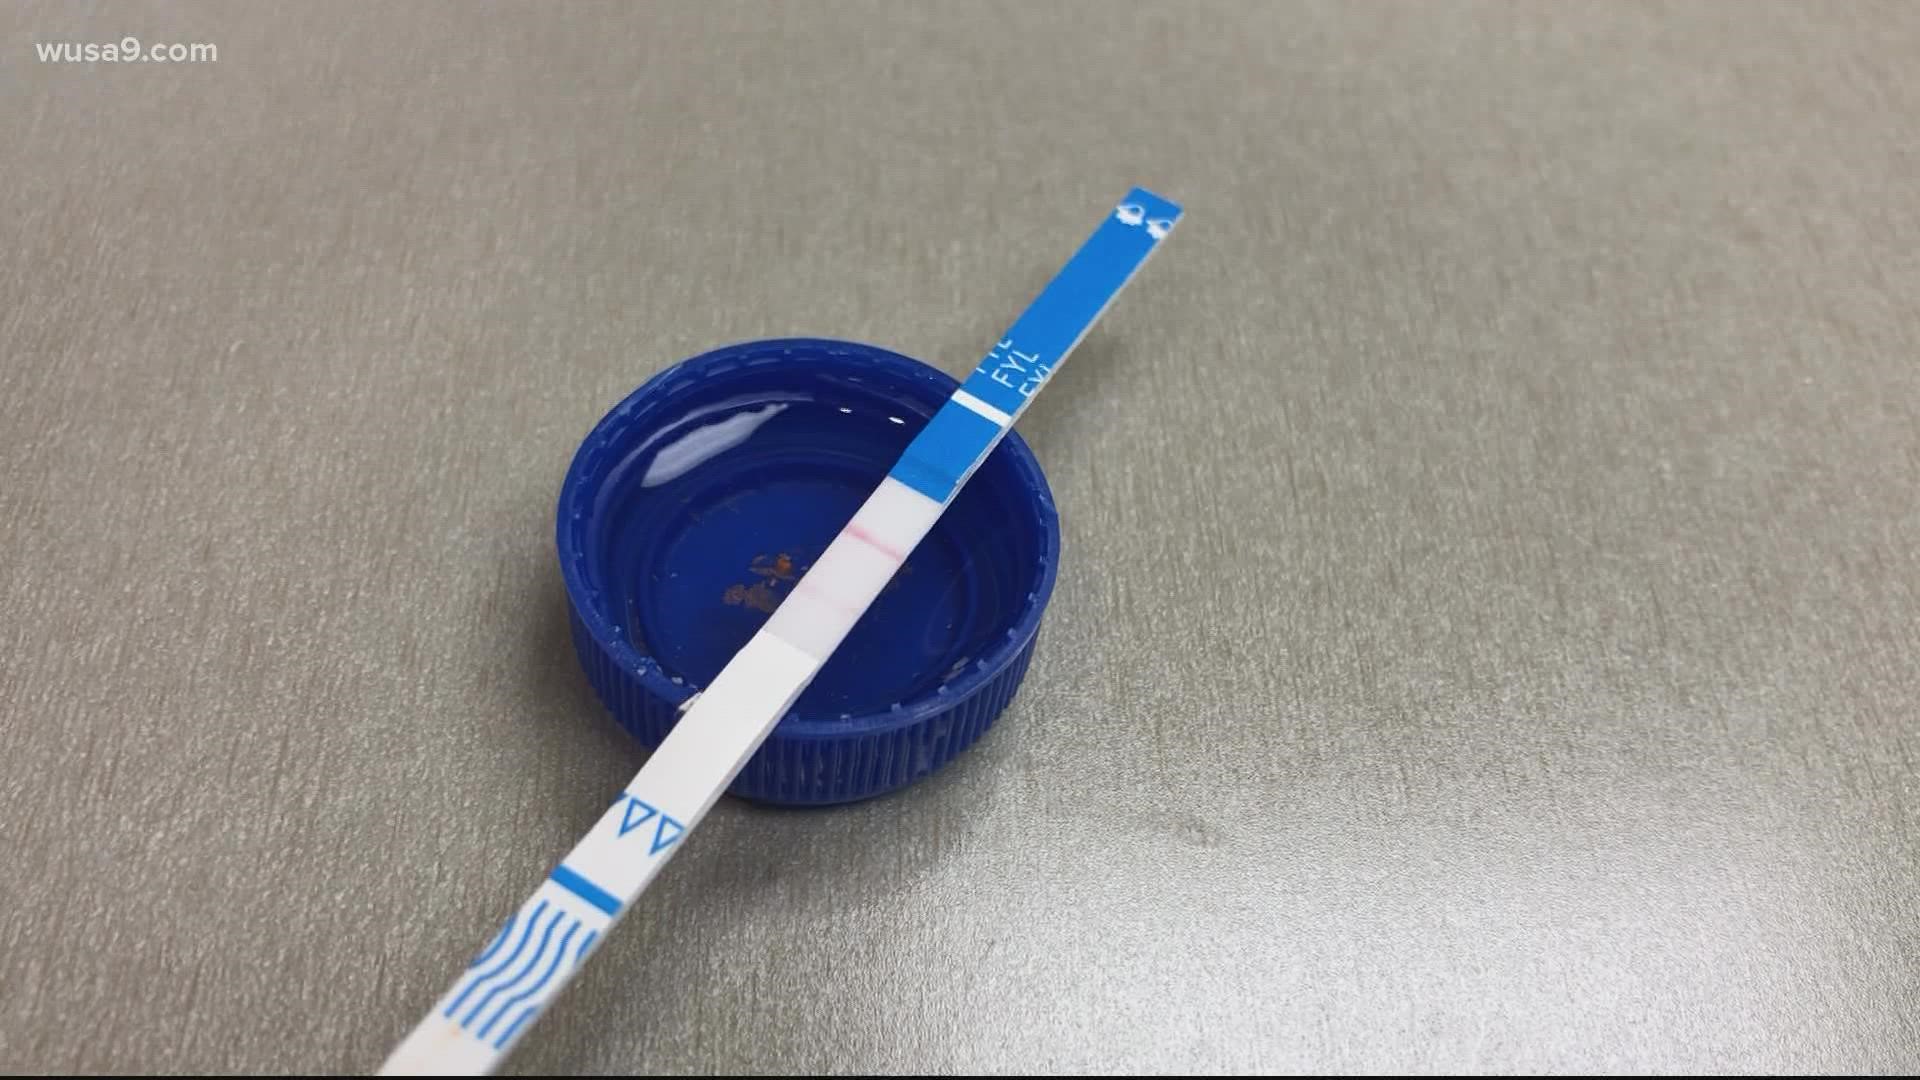 Arlington County increased the number of fentanyl strips after running out during the first week of its pilot program.